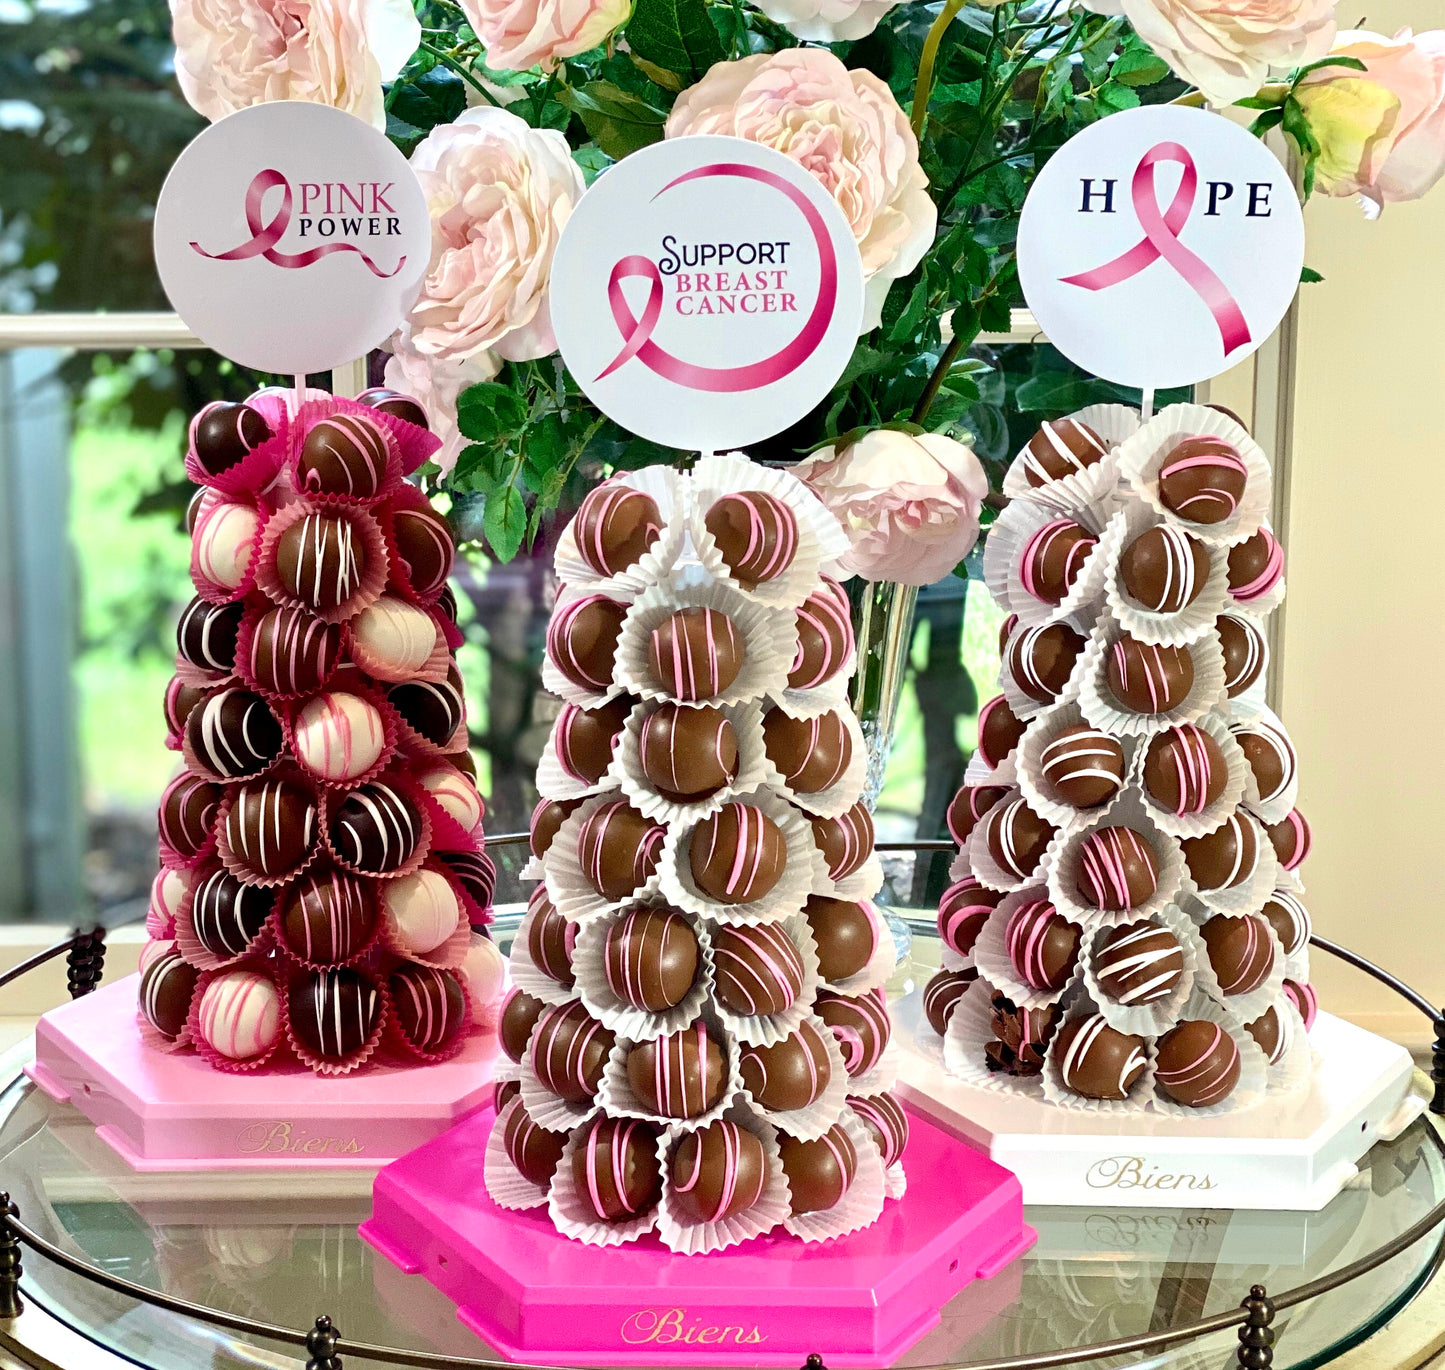 Biens Chocolate Centerpieces Gift Tower- Breast Cancer Awareness Fundraiser - The Dessert Ladies